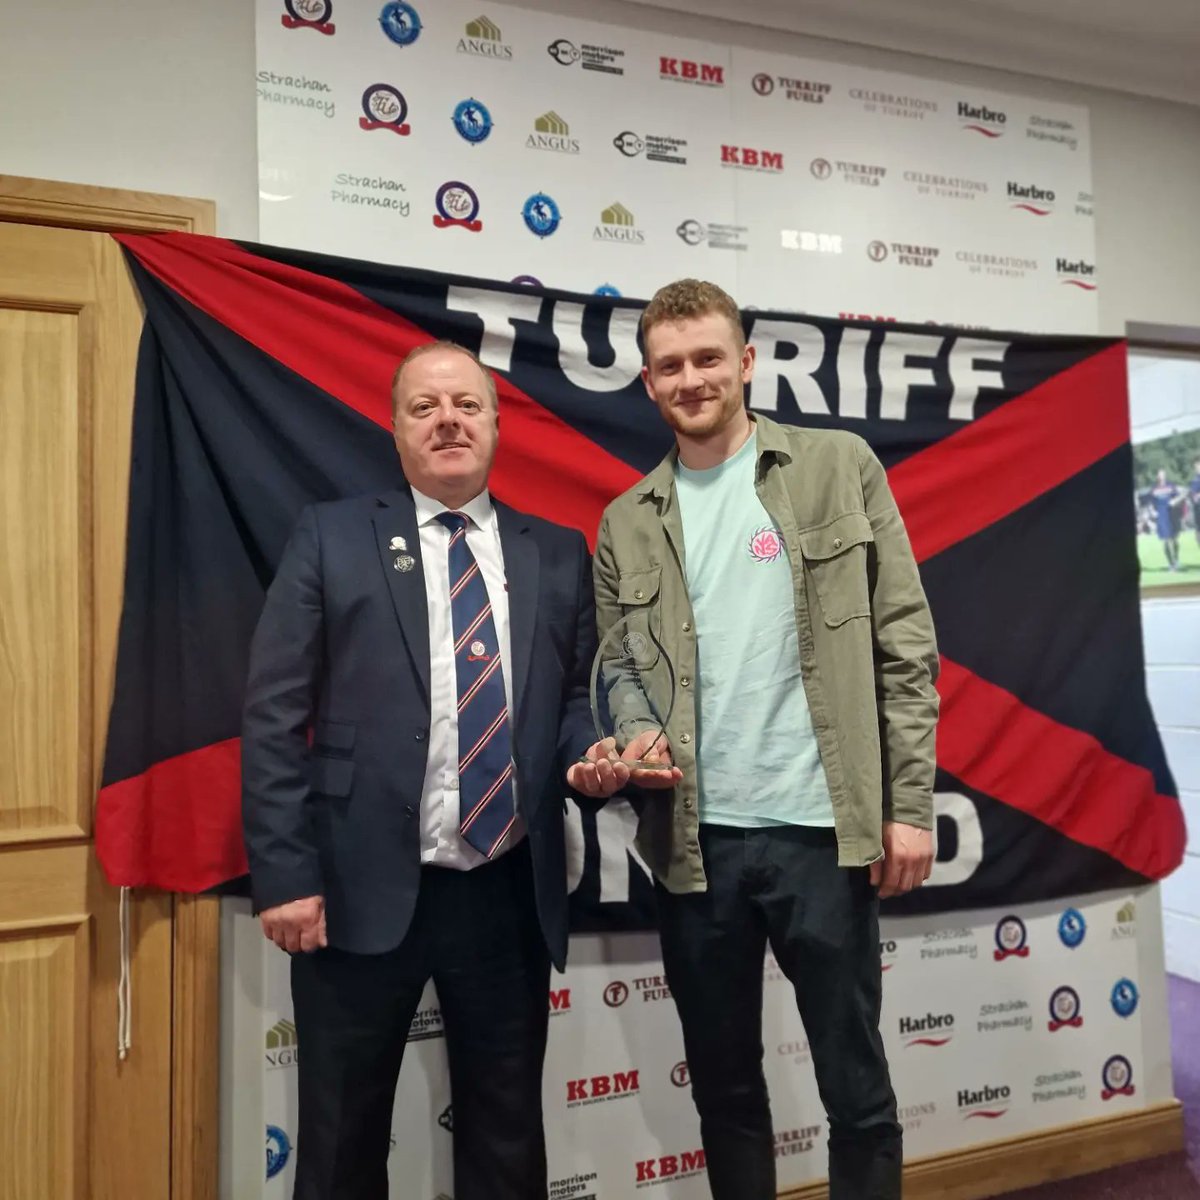 Next up we had the award for Committee Player of the Year as sponsored by Angus Homes Ltd and presented by Chairman @GairGairn to.....David Dey